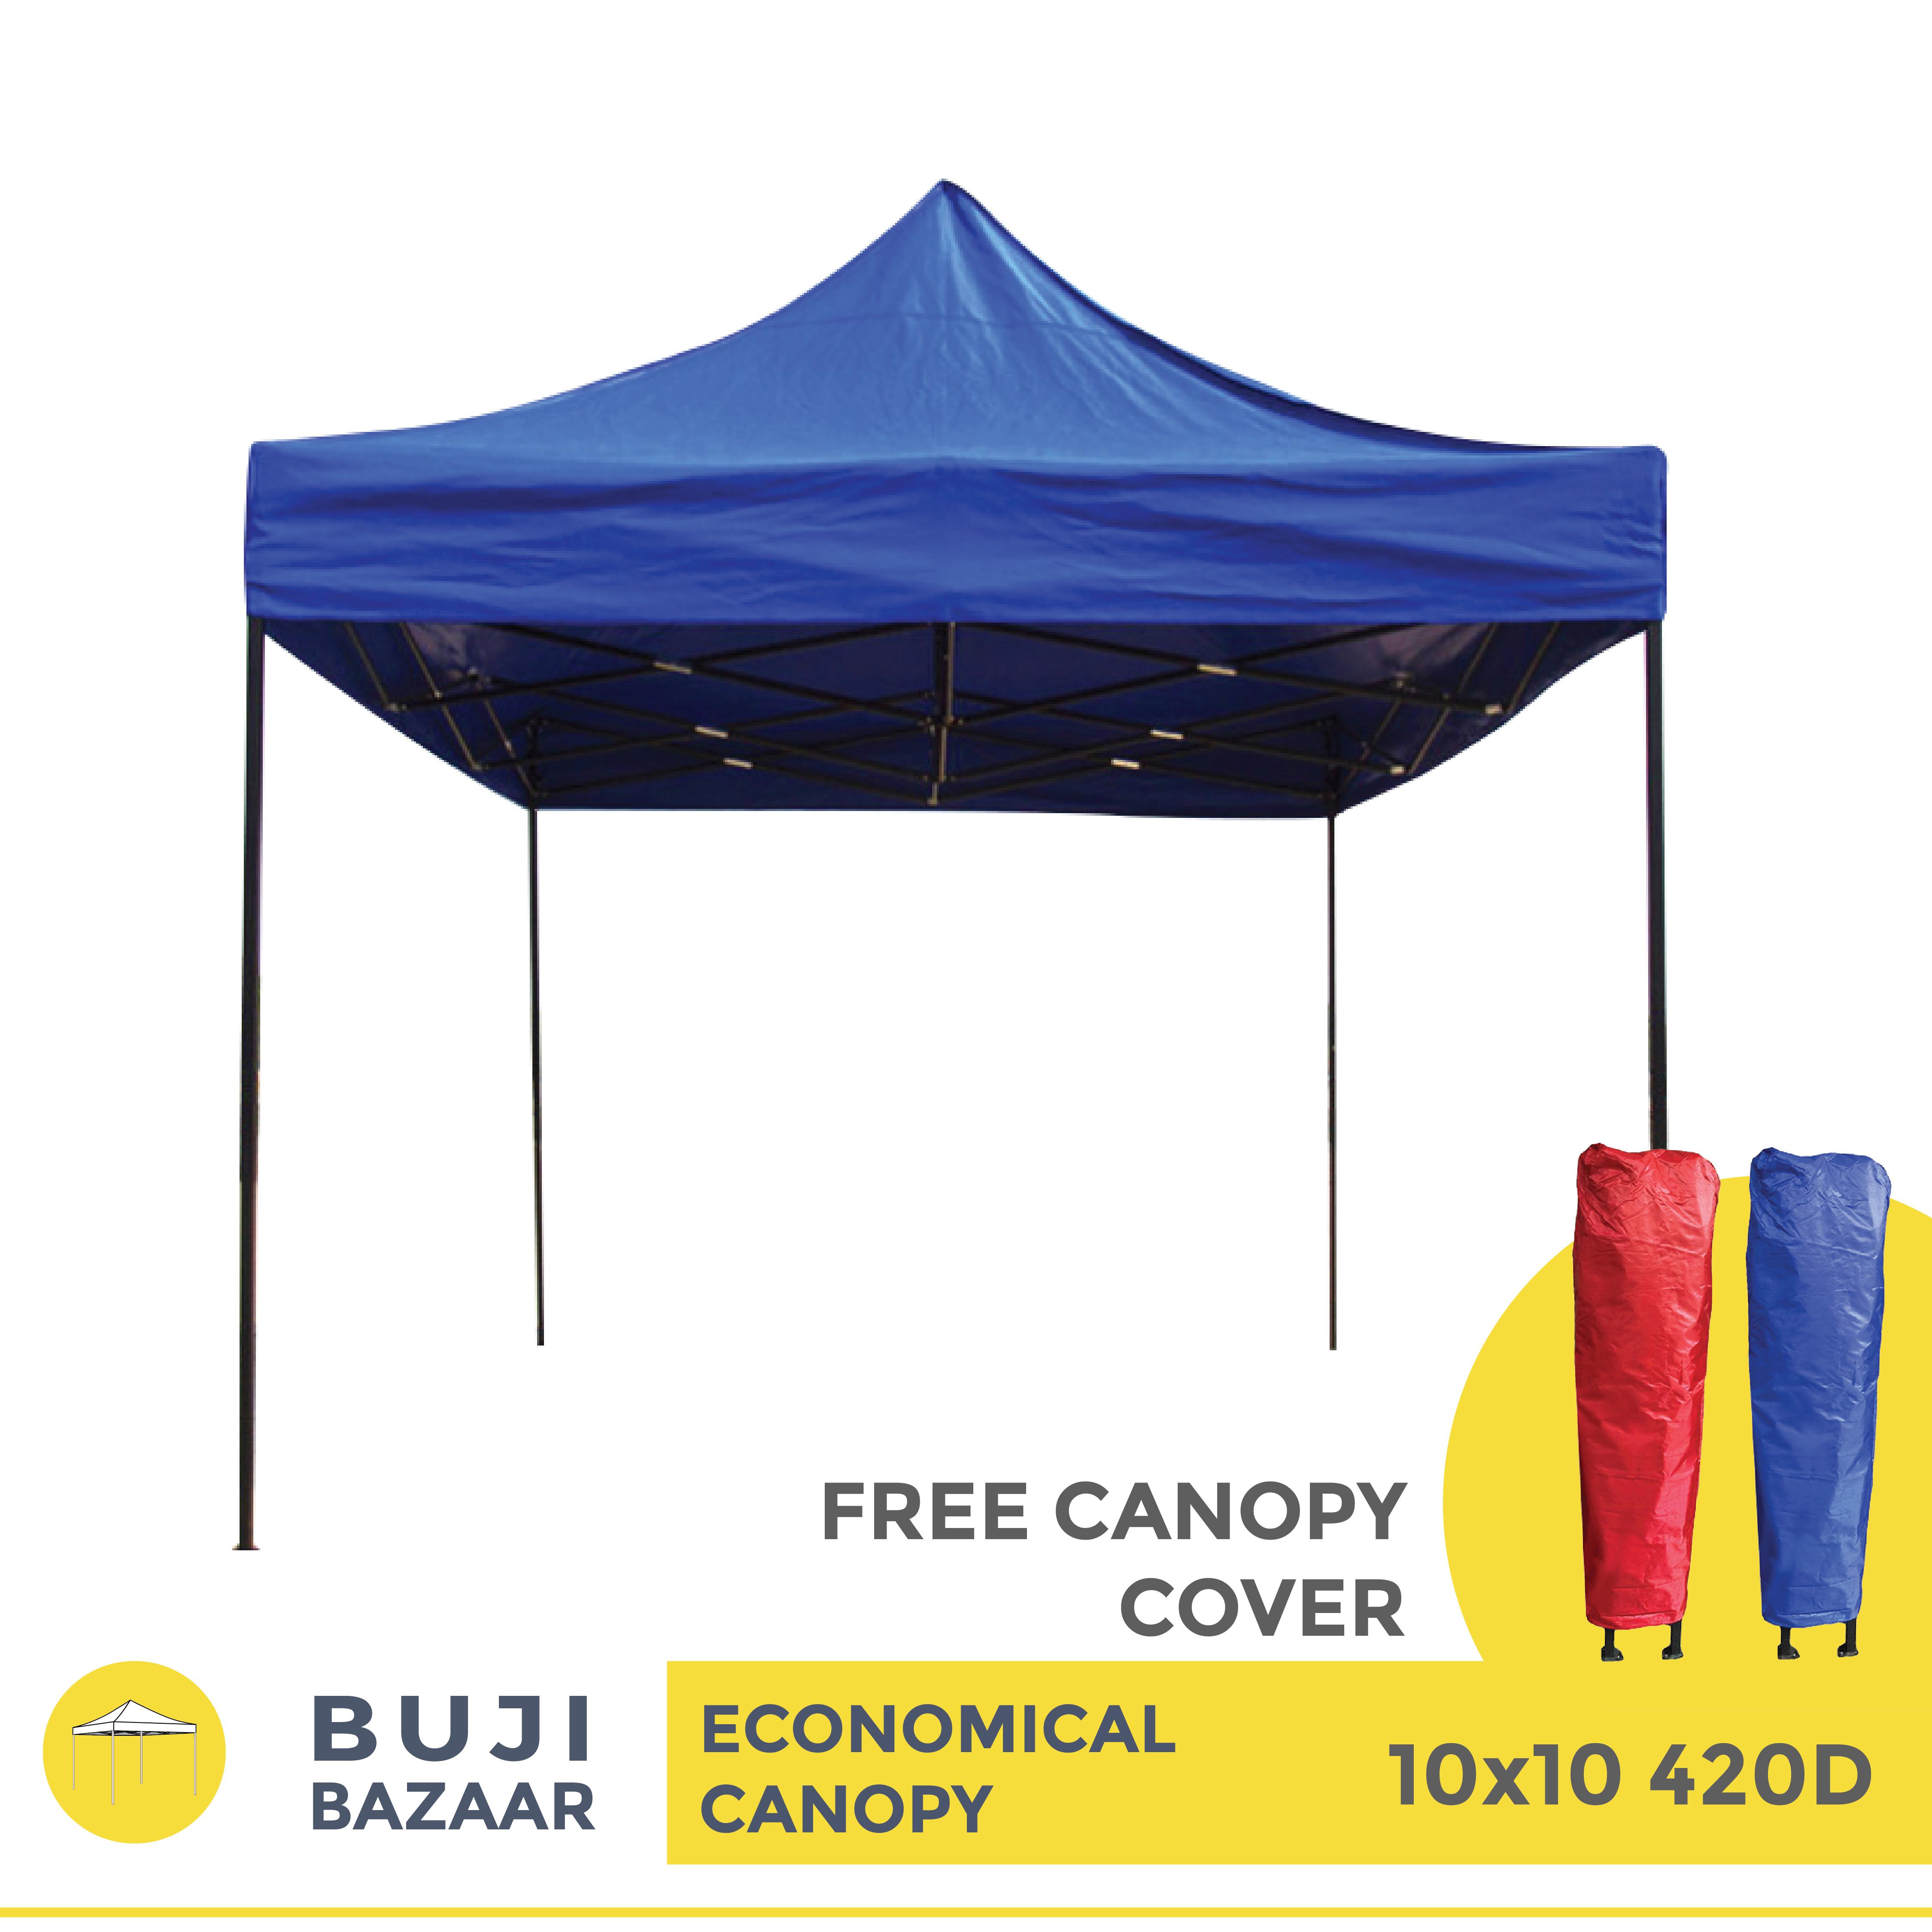 Bazaar Outdoor Large Single Side Canopy Awning Tent Beach Sun Shade Rainproof UV-proof For Camping Hiking 